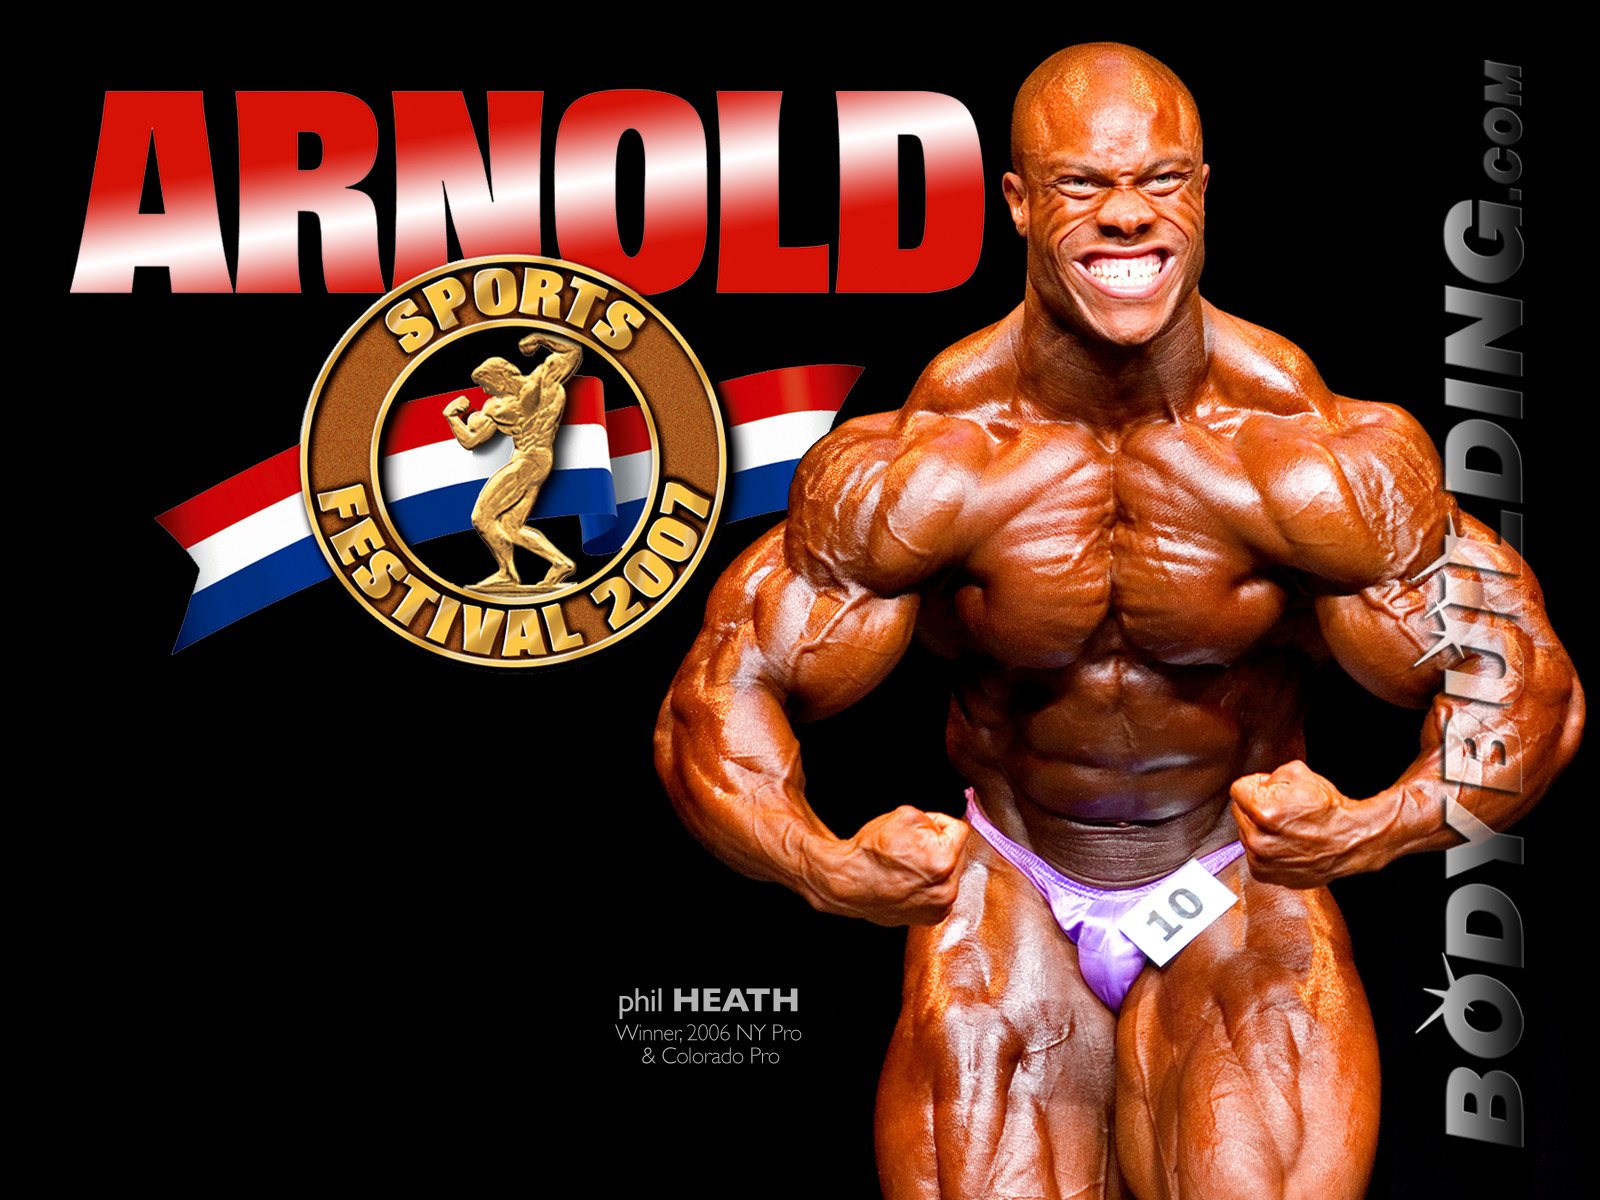 Raw footage from the 2010 #arnoldclassic #philheath #bodybuilding #muscle # posing | Instagram